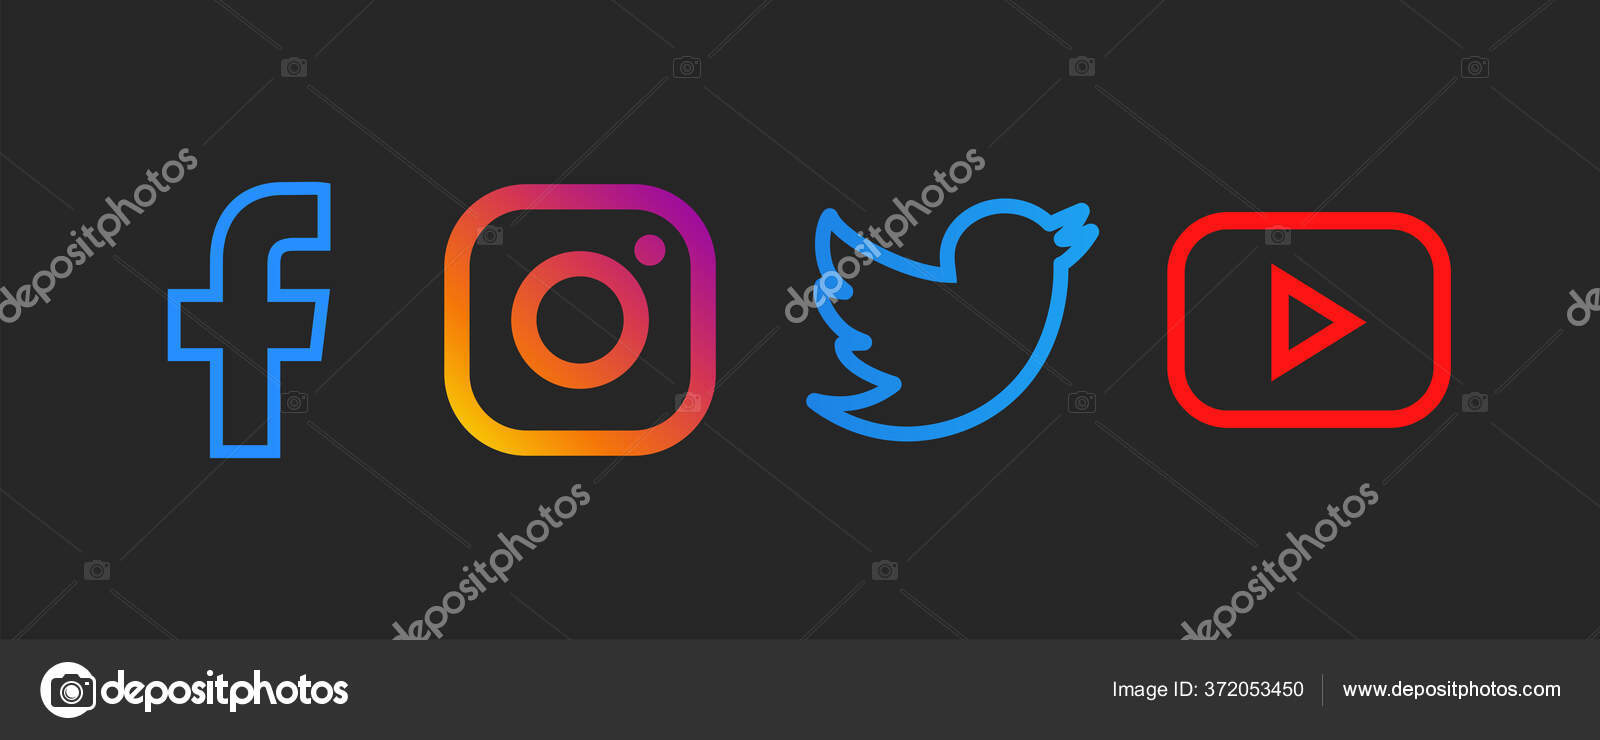 Facebook Instagram Twitter Youtube Collection Popular Social Media Logo Black Stock Vector Royalty Free Vector Image By C Leberus777 Gmail Com